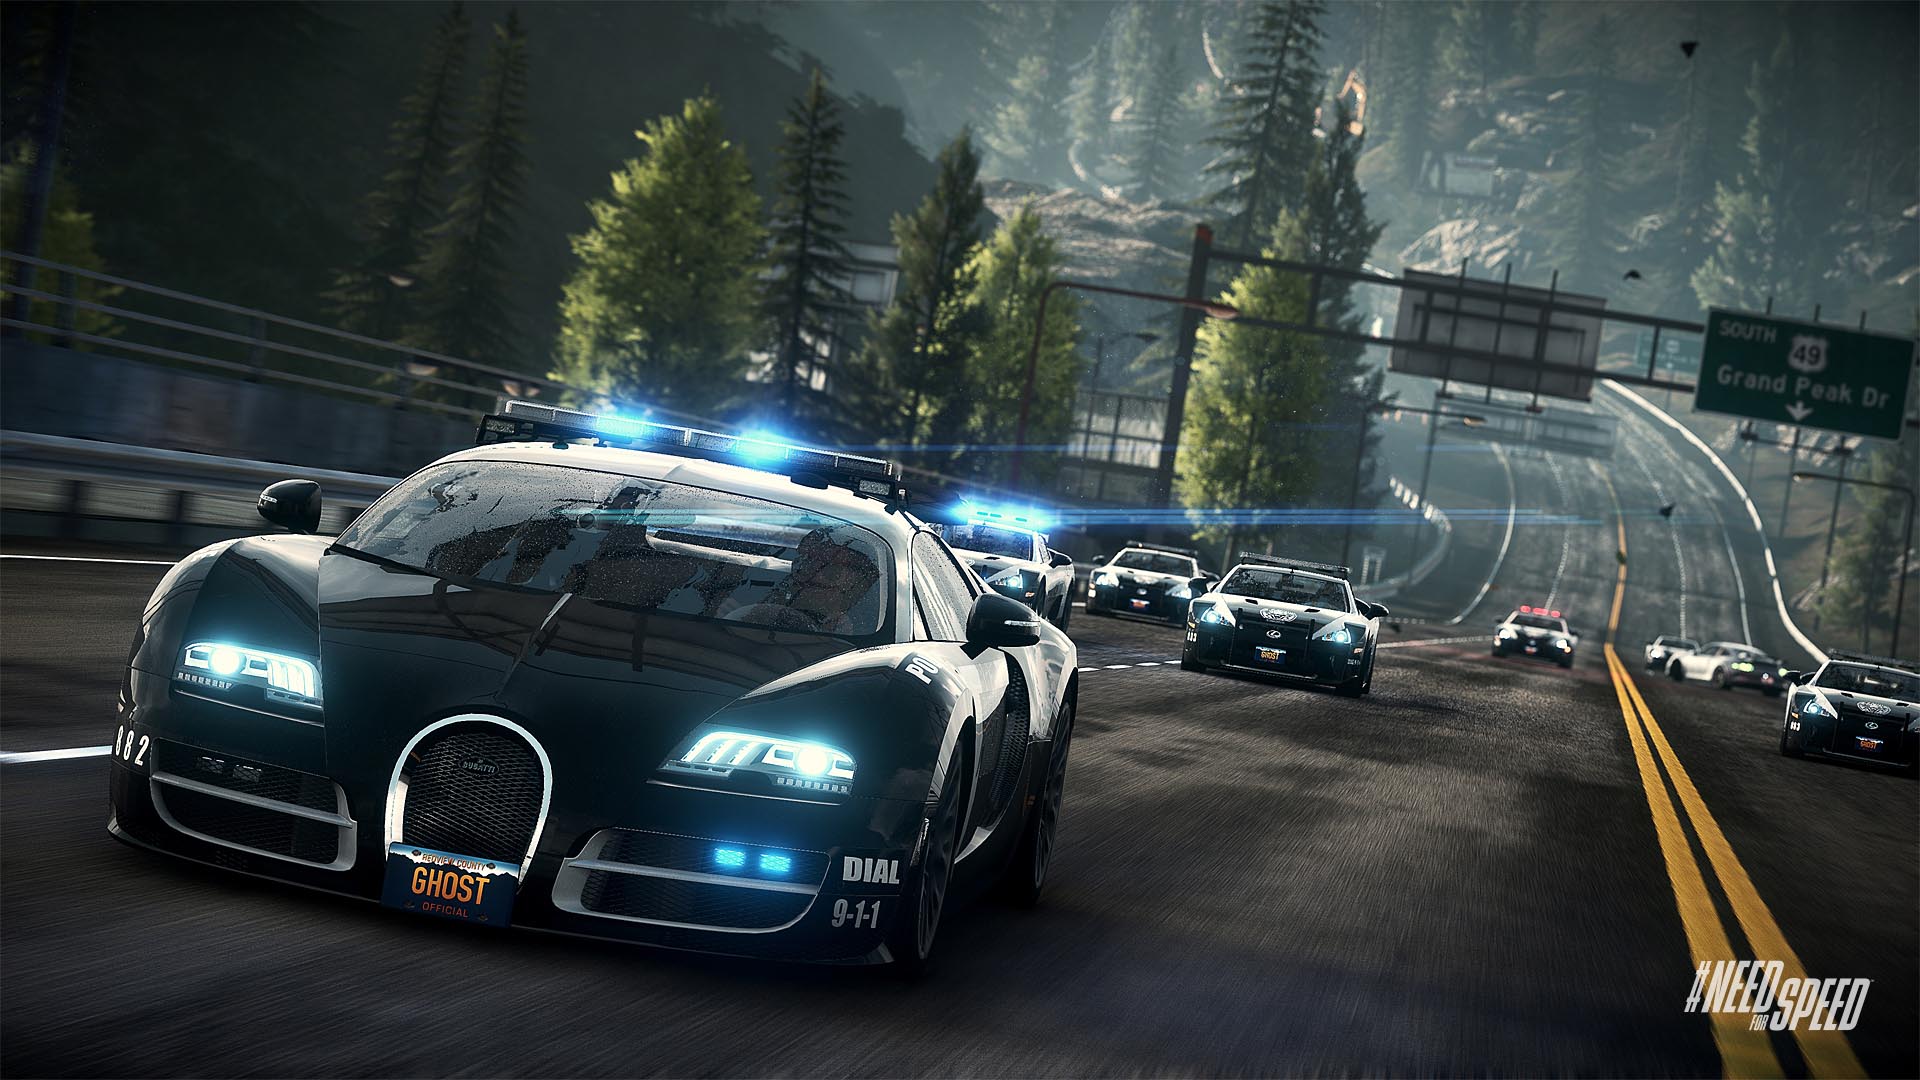 There’s a new <i>Need for Speed</i> expected in November, but if you need your classic cops vs street racers fix, there’s nothing better. If you’re out looking for a physical copy, the Complete Edition includes all DLC packs. The Wii U version of <i>Most Wanted</i> gets a special mention here as one of the few games that take full advantage of the Wii U gamepad. | <b>For:</b> PC, PS4, Xbox One, PS3, Xbox 360